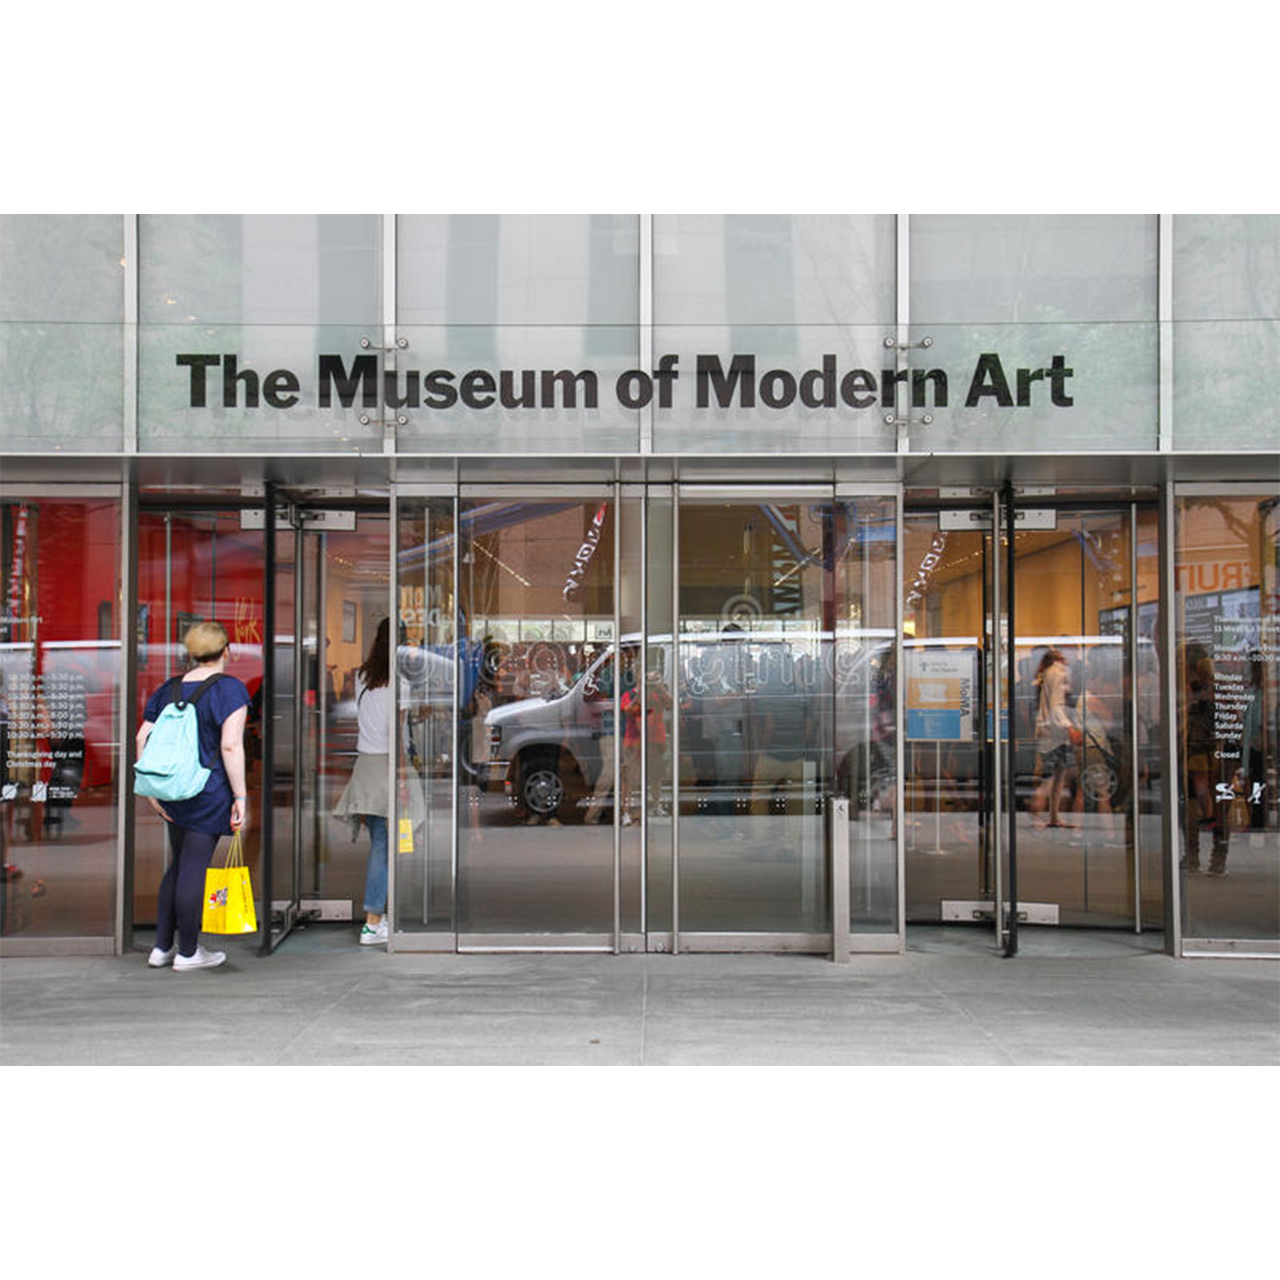 Cover Image for MoMA to Sell an Estimated $70M Worth of Physical Art to Expand Digital Footprint